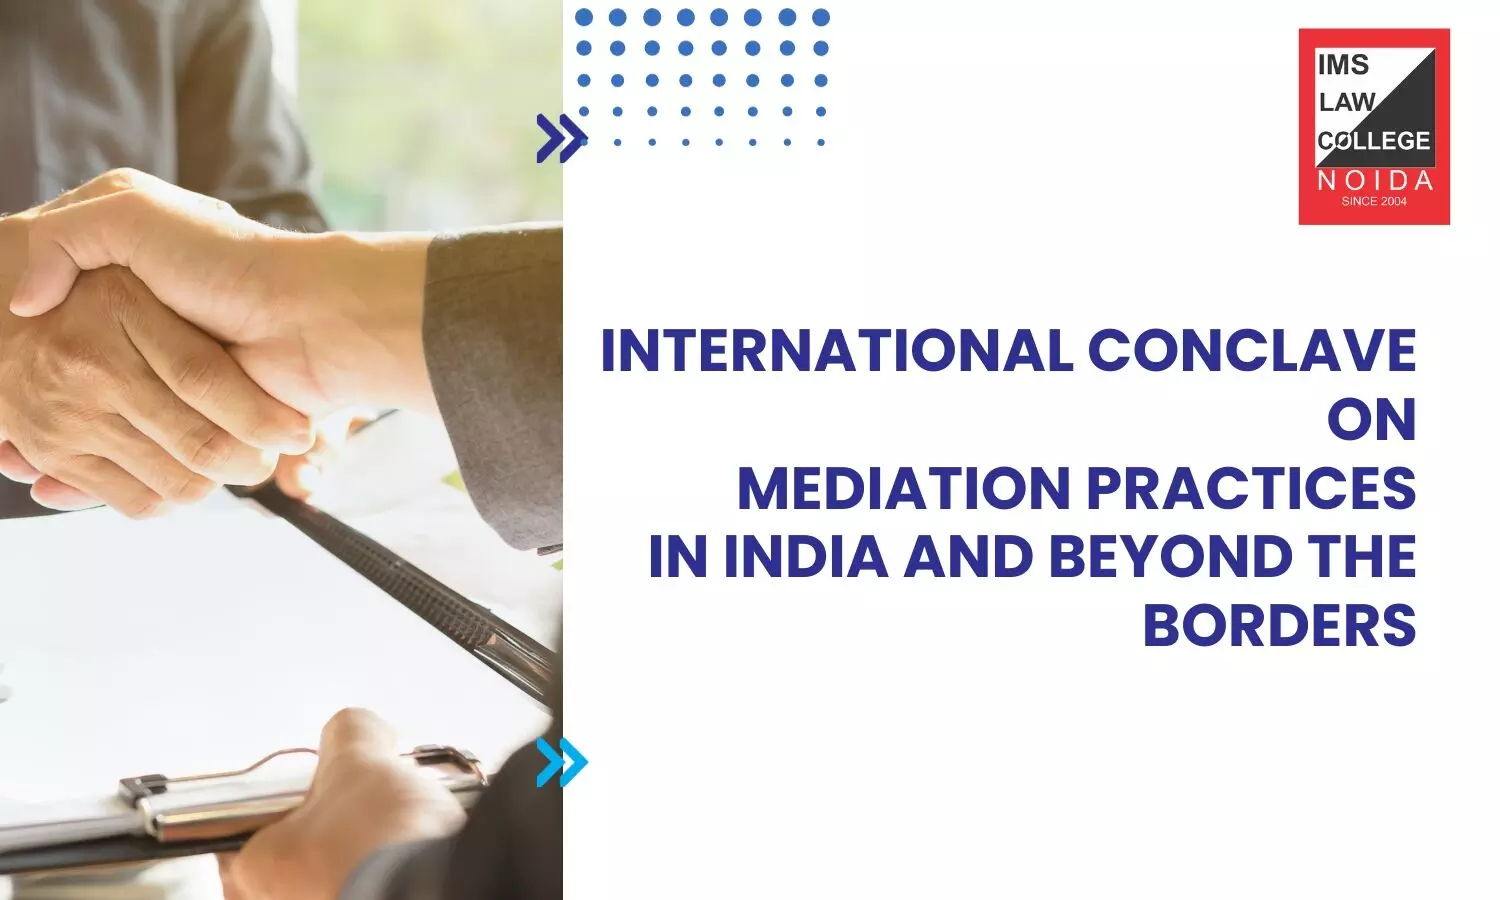 International Conclave on Mediation Practices in India and Beyond the Borders  IMS Law College